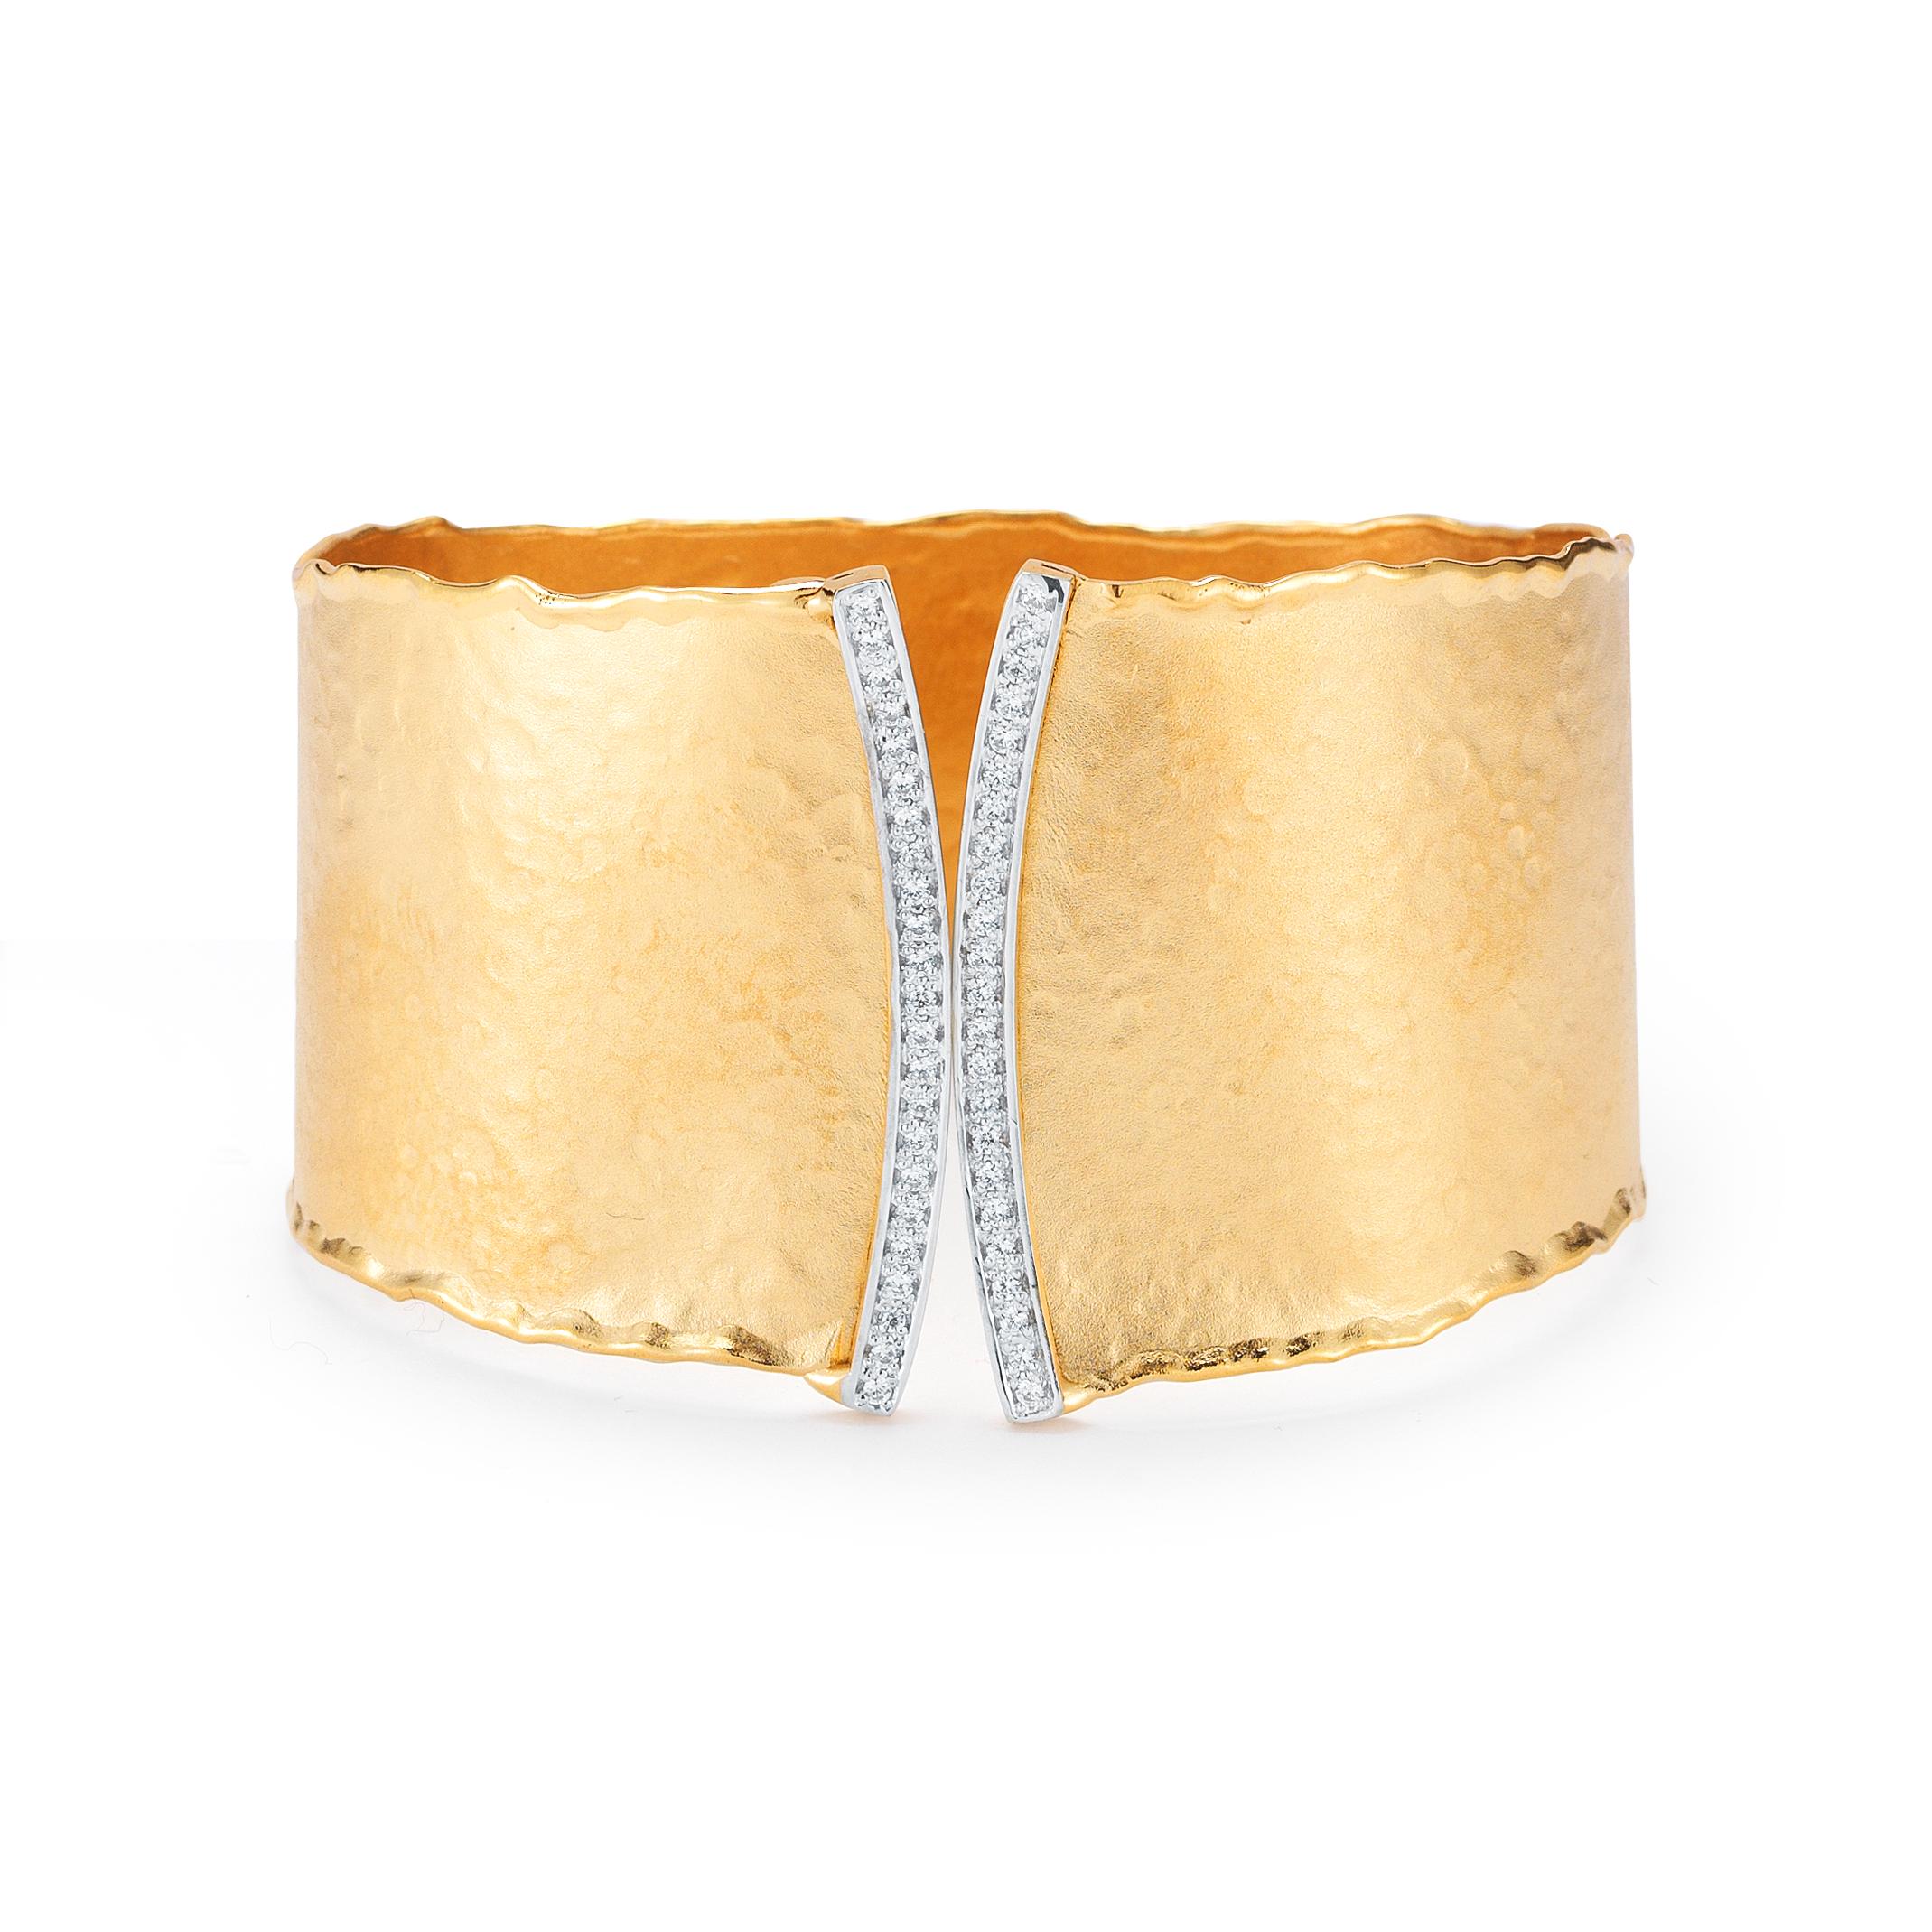 14 Karat Yellow Gold Hand-Crafted Matte and Hammer-Finished Scallop-Edged Cuff Bracelet, Enhanced with 0.57 Carat of Pave Set Curved Diamond Bars.
